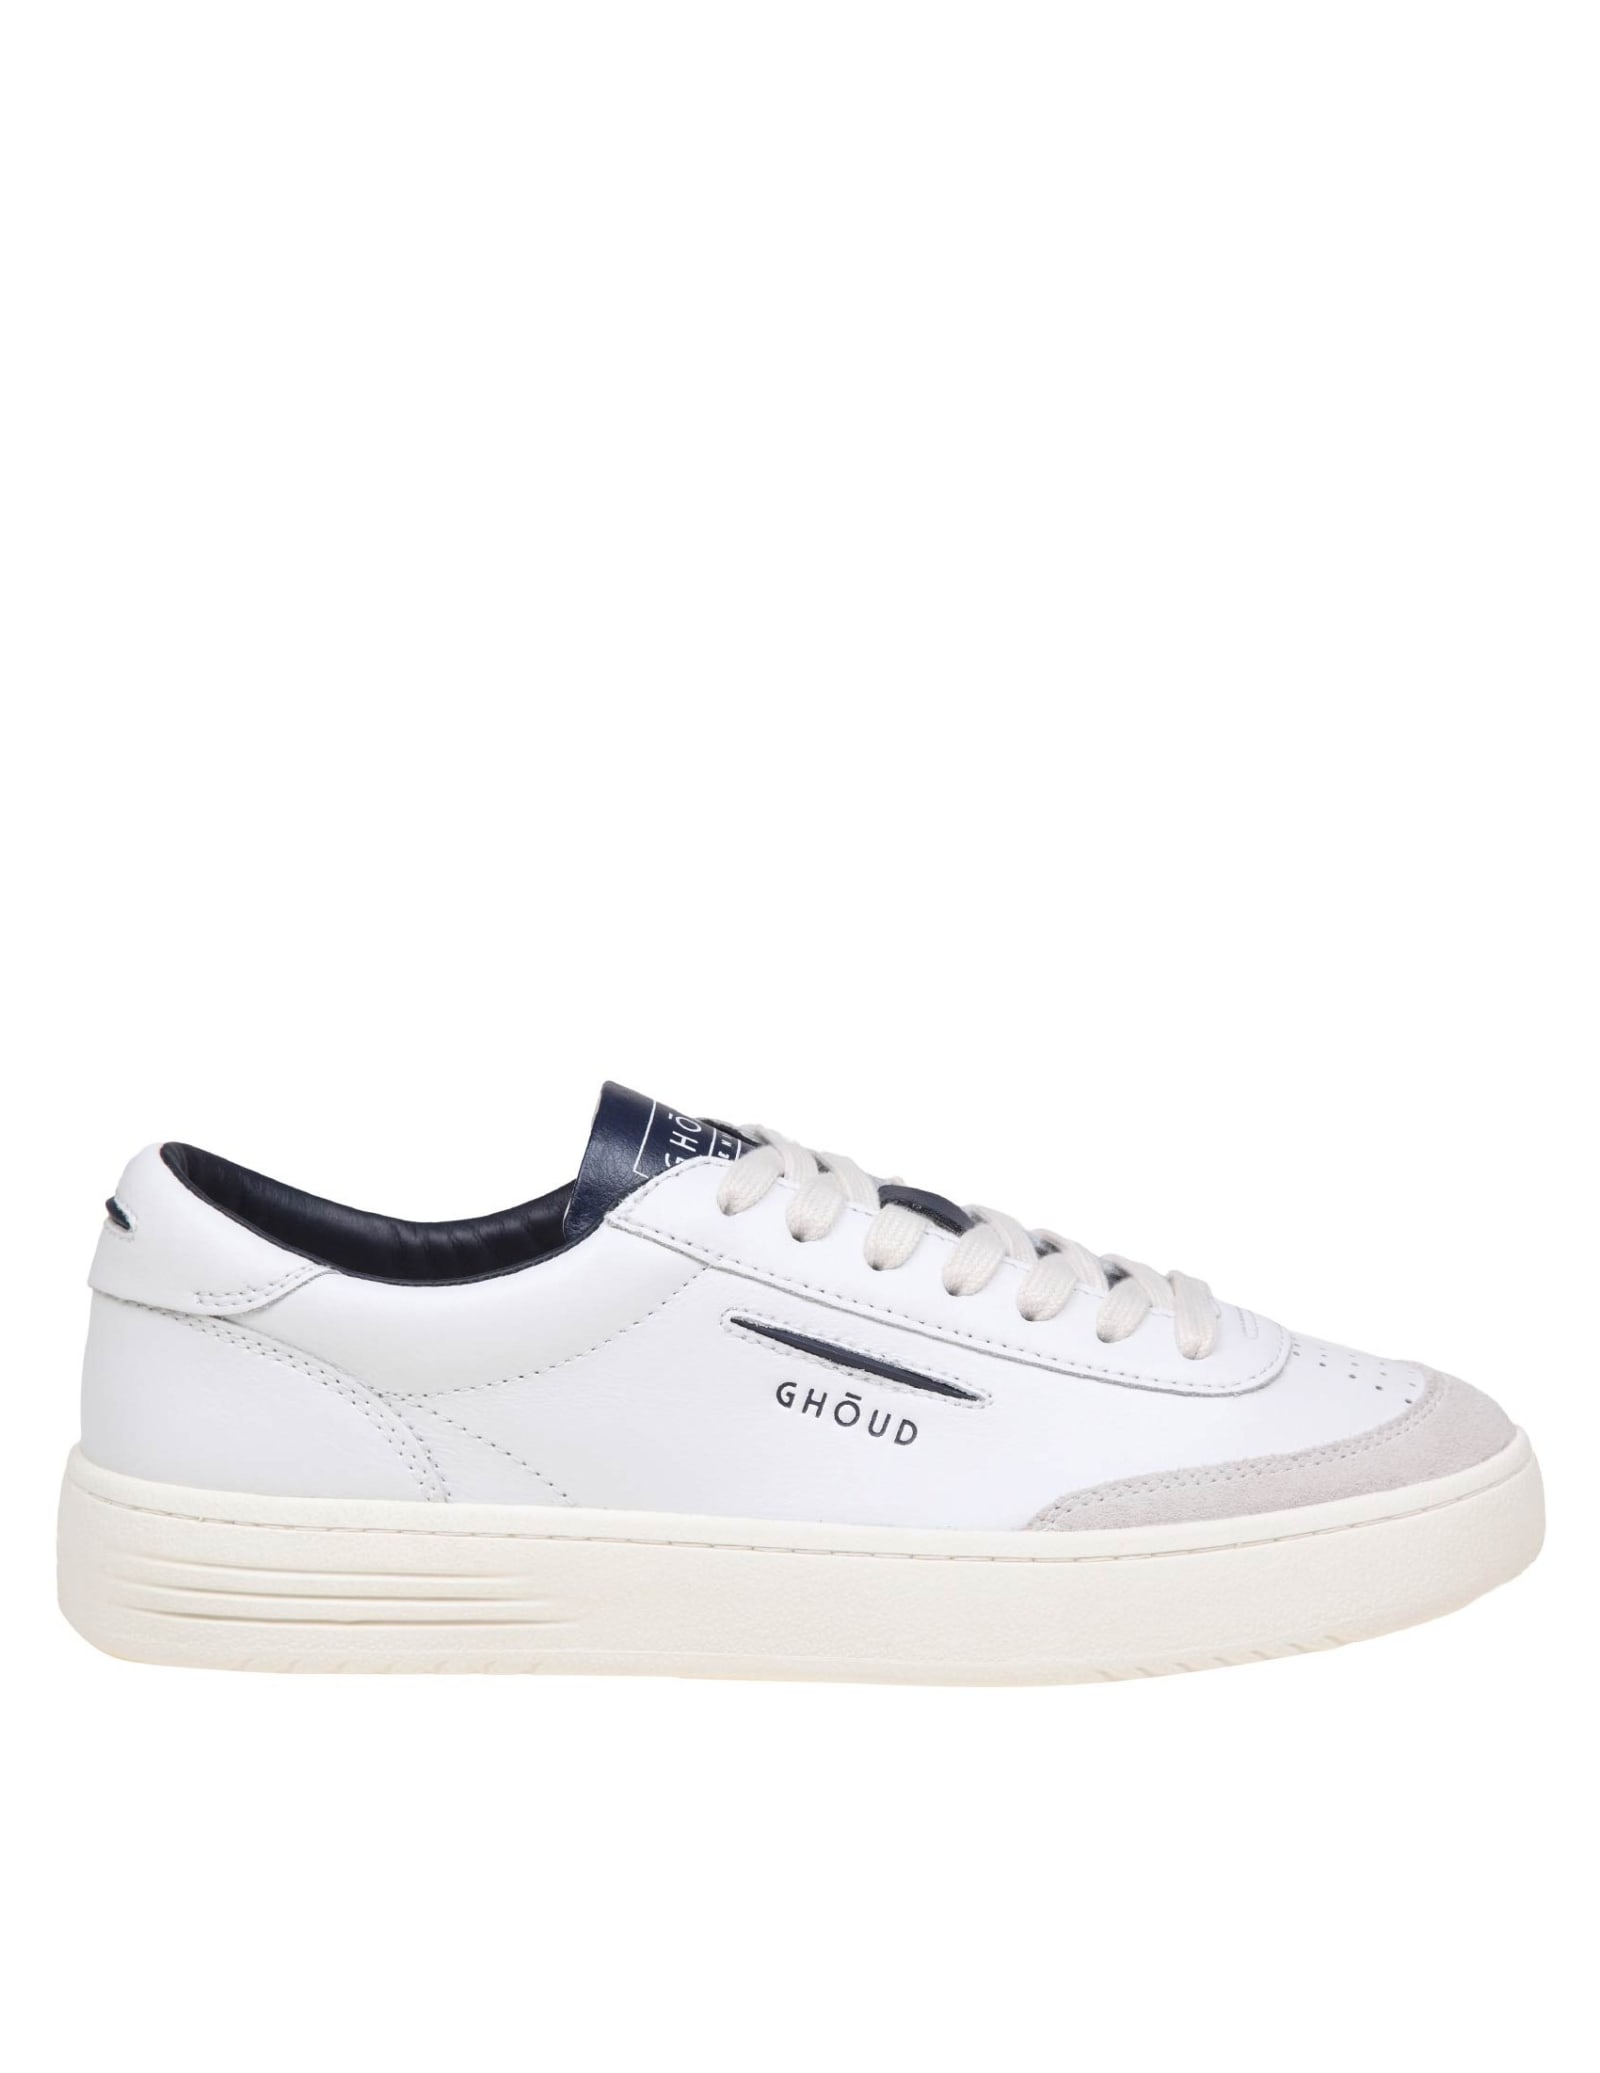 Lido Low Sneakers In White/blue Leather And Suede